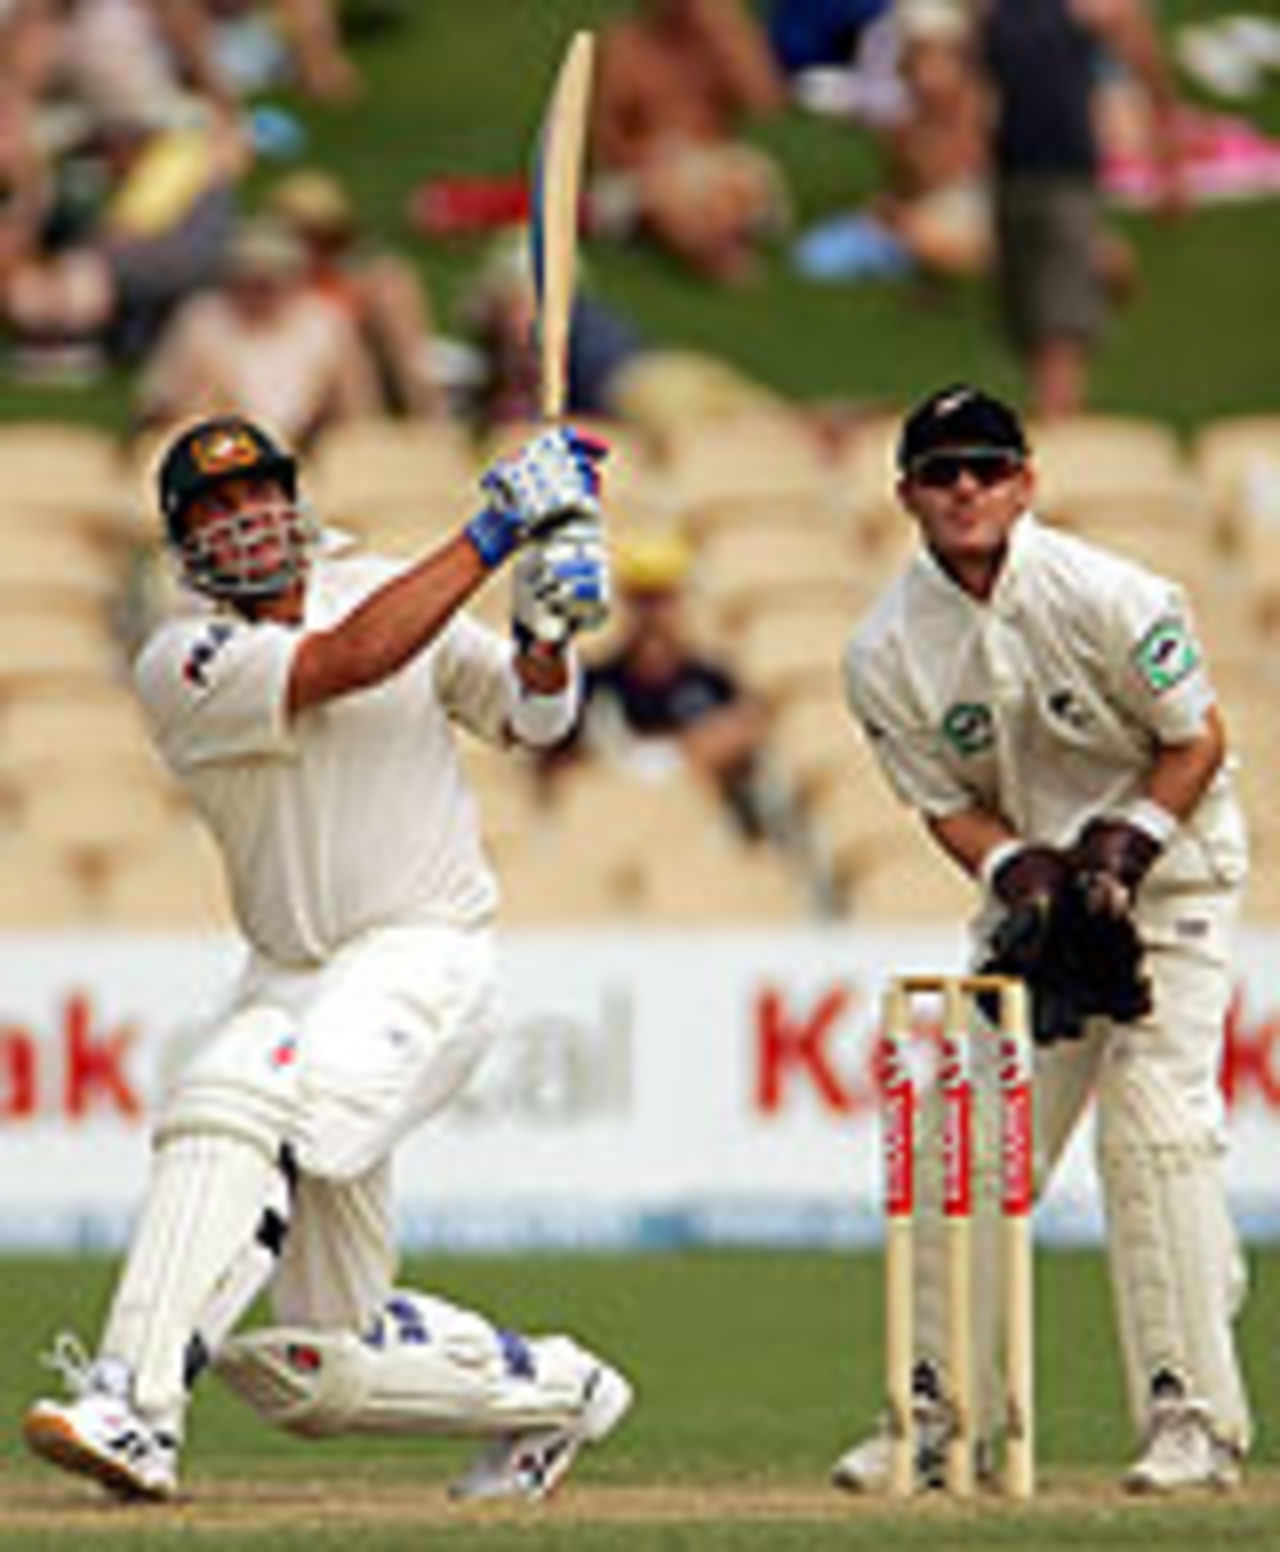 Shane Warne sweeps for six, during his 63-ball half-century on the second day of the Adelaide Test, Australia v New Zealand, 2nd Test, Adelaide, November 27, 2004